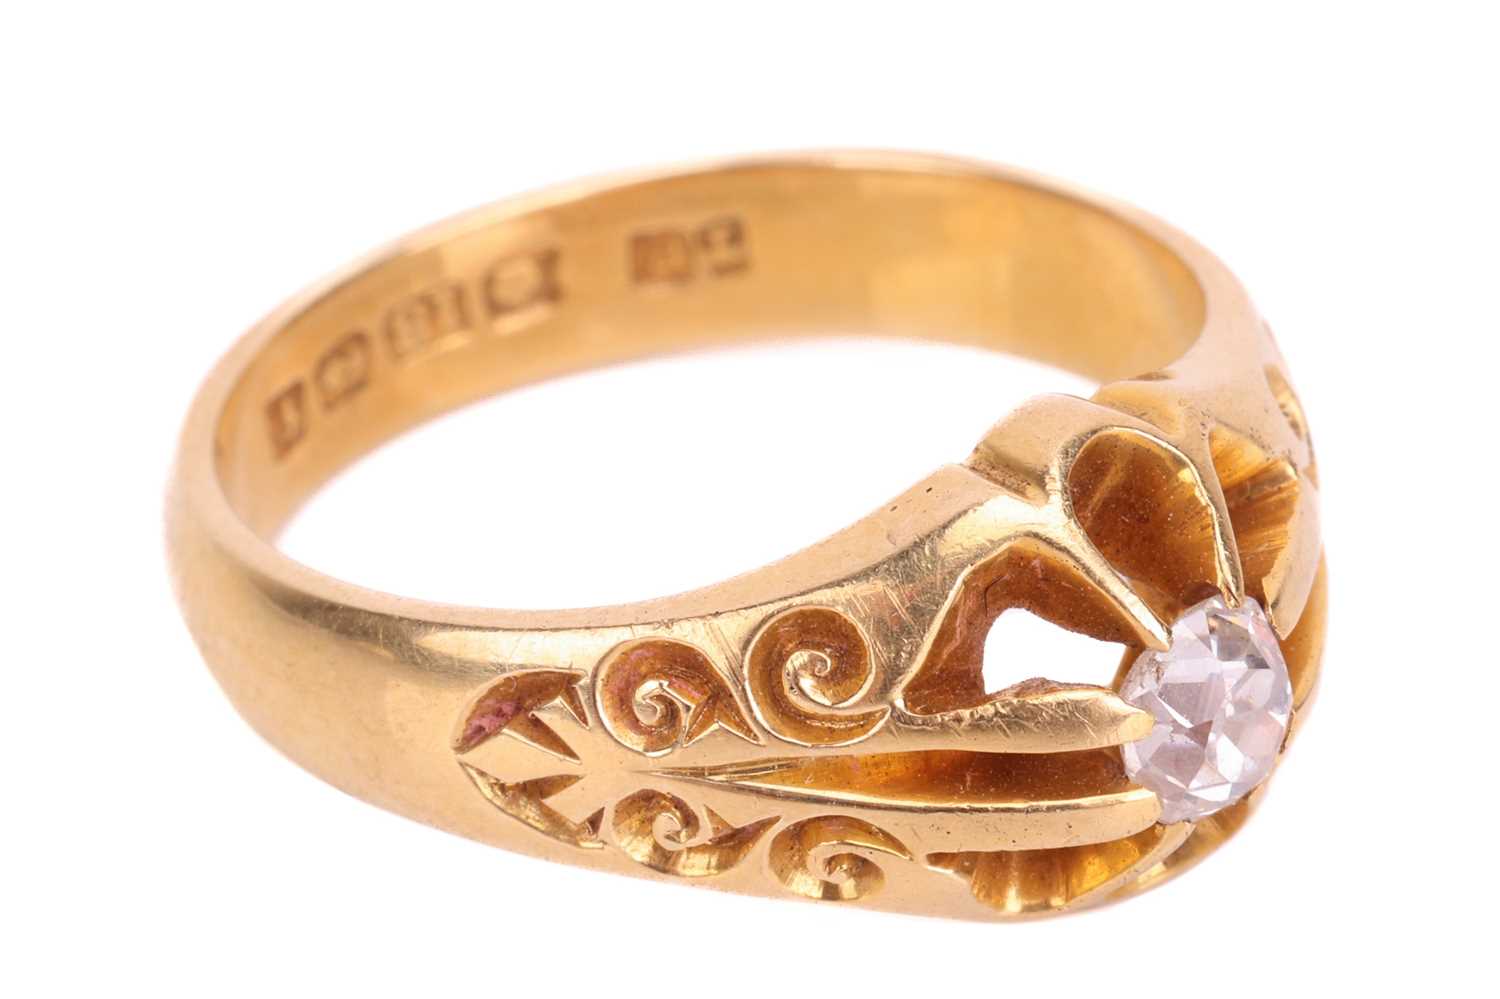 An Edwardian diamond gypsy ring in 18ct yellow gold, comprising a cushion-shaped old-cut diamond of  - Image 2 of 4